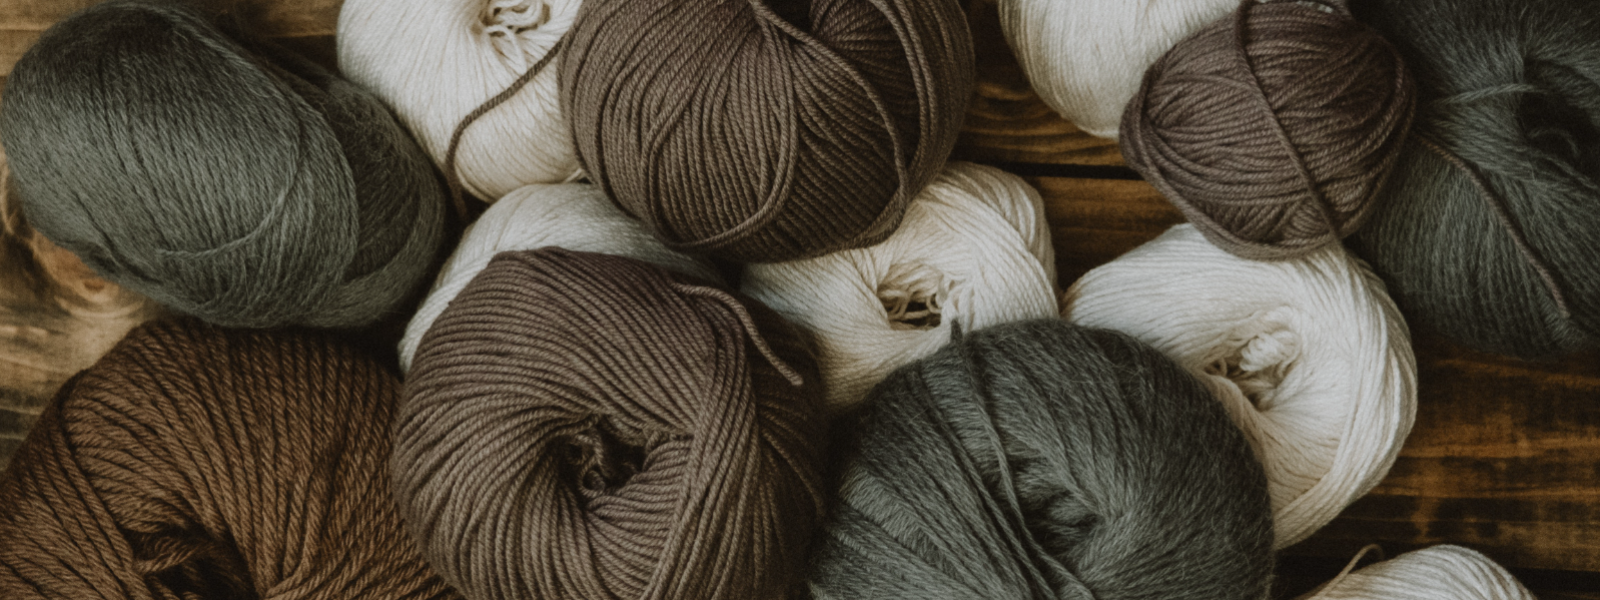 GRACE ACTIVE CAPITAL OÜ - We offer an exquisite selection of the finest yarns sourced from Italy and beyond.